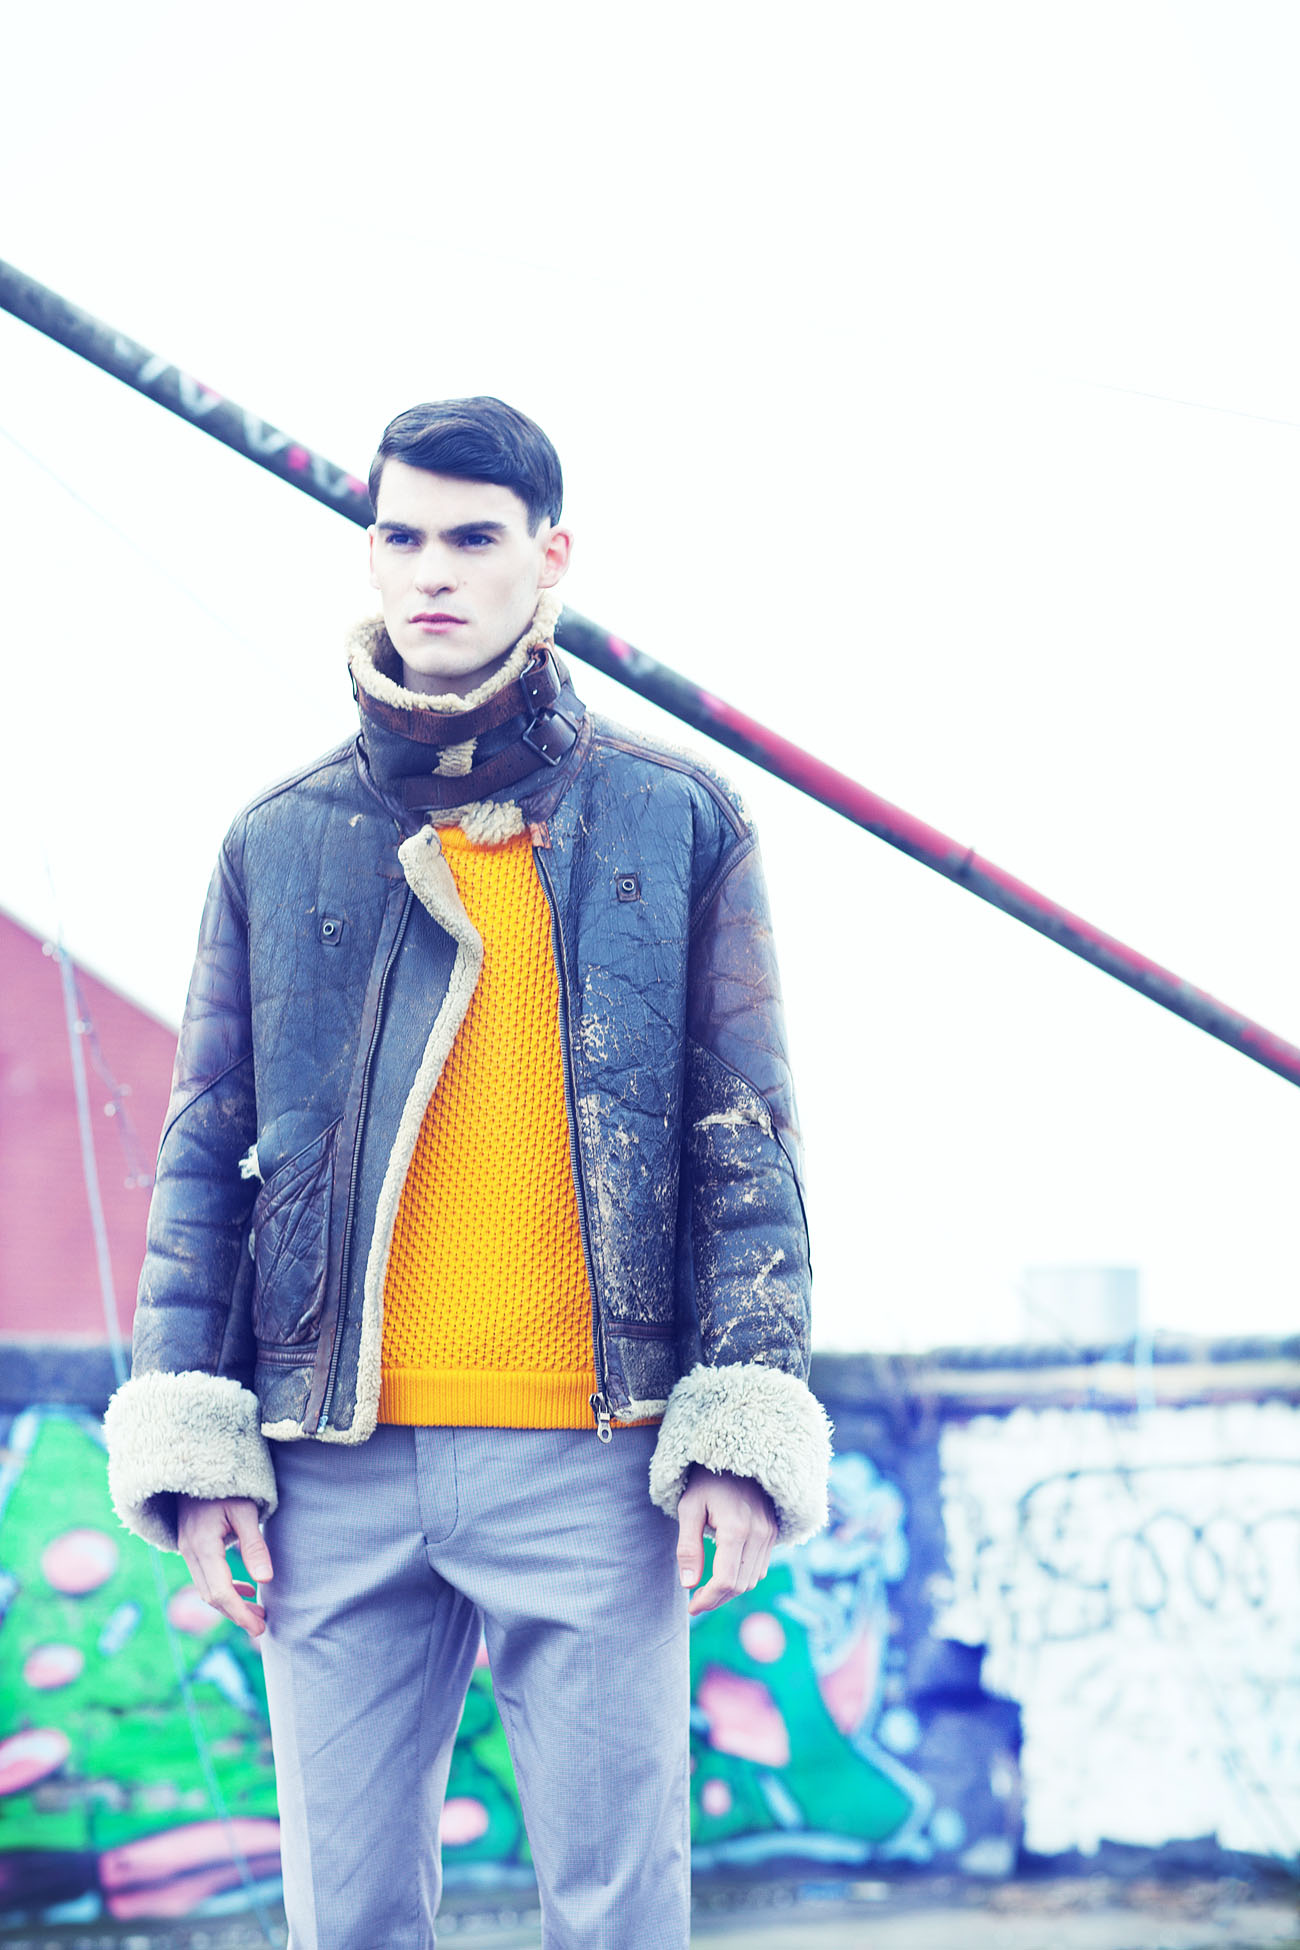 EMMANUEL CORRE BY VIC LENTAIGNE FOR CHASSEUR MAGAZINE ISSUE #3 ...